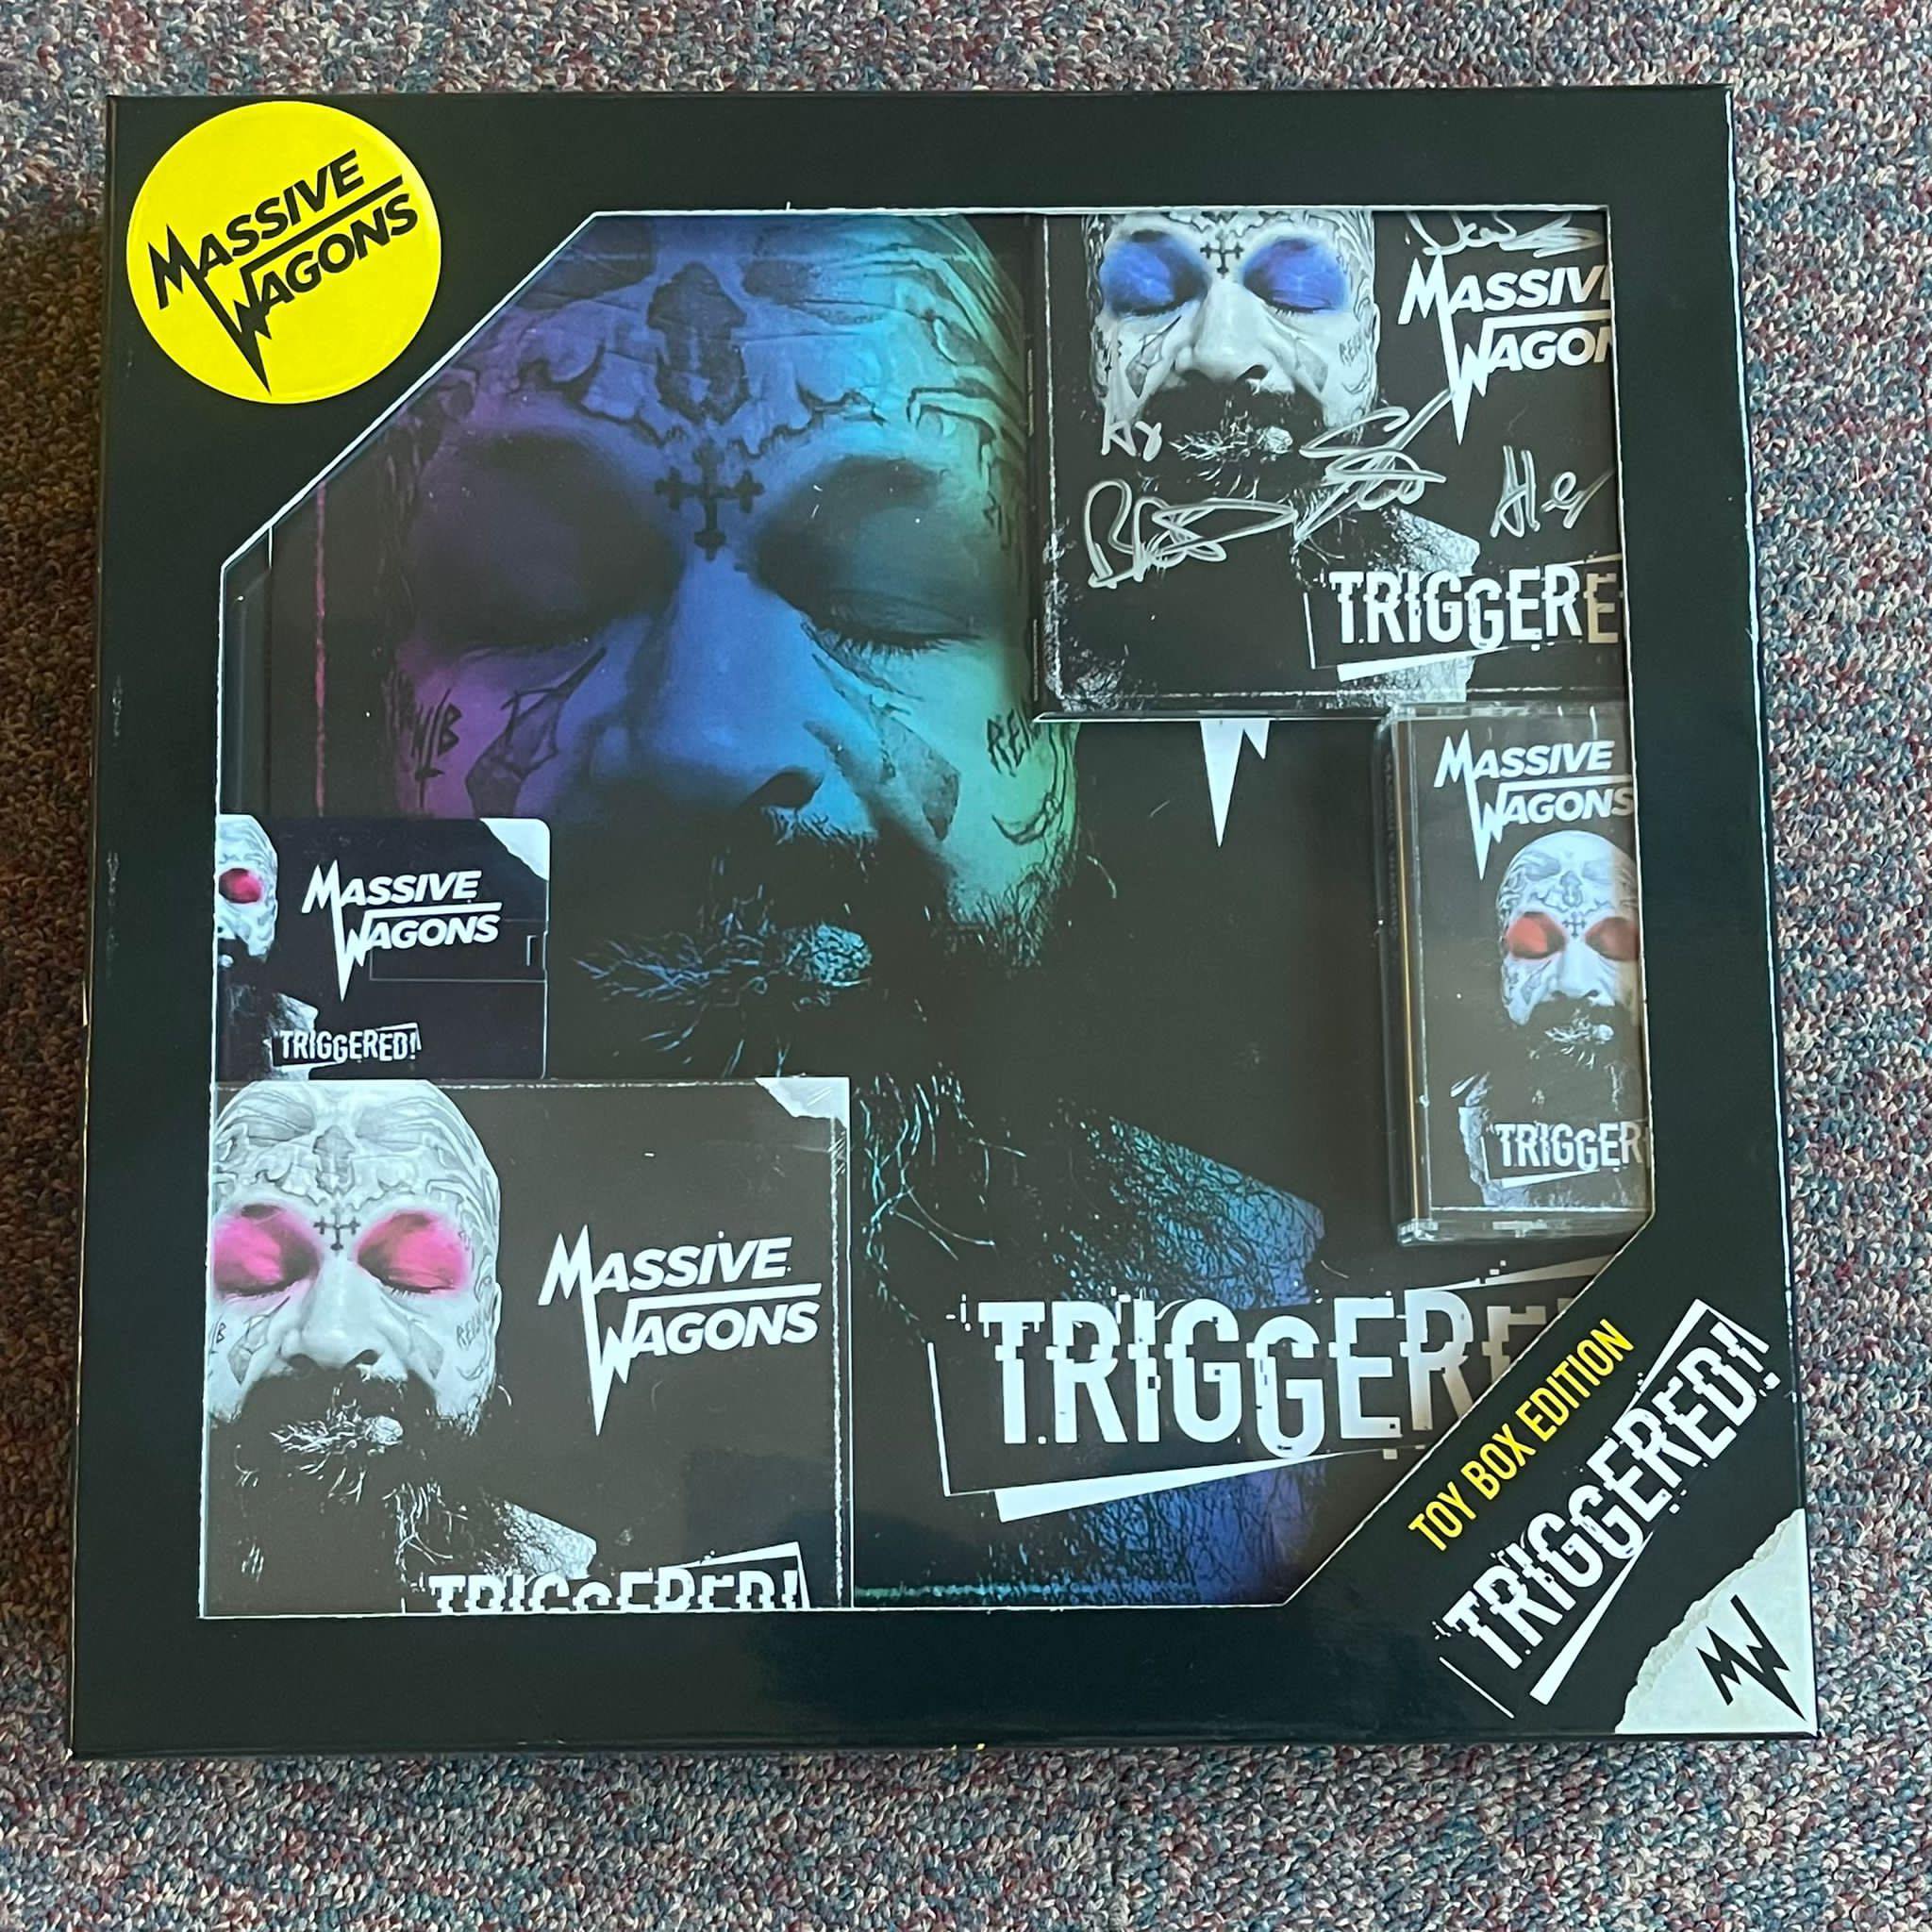 Massive Wagons "TRIGGERED!" Signed Collector's Edition - 6 LPs, 2 CDs, Cassette, USB & Collector's Toy Box (200 Only)